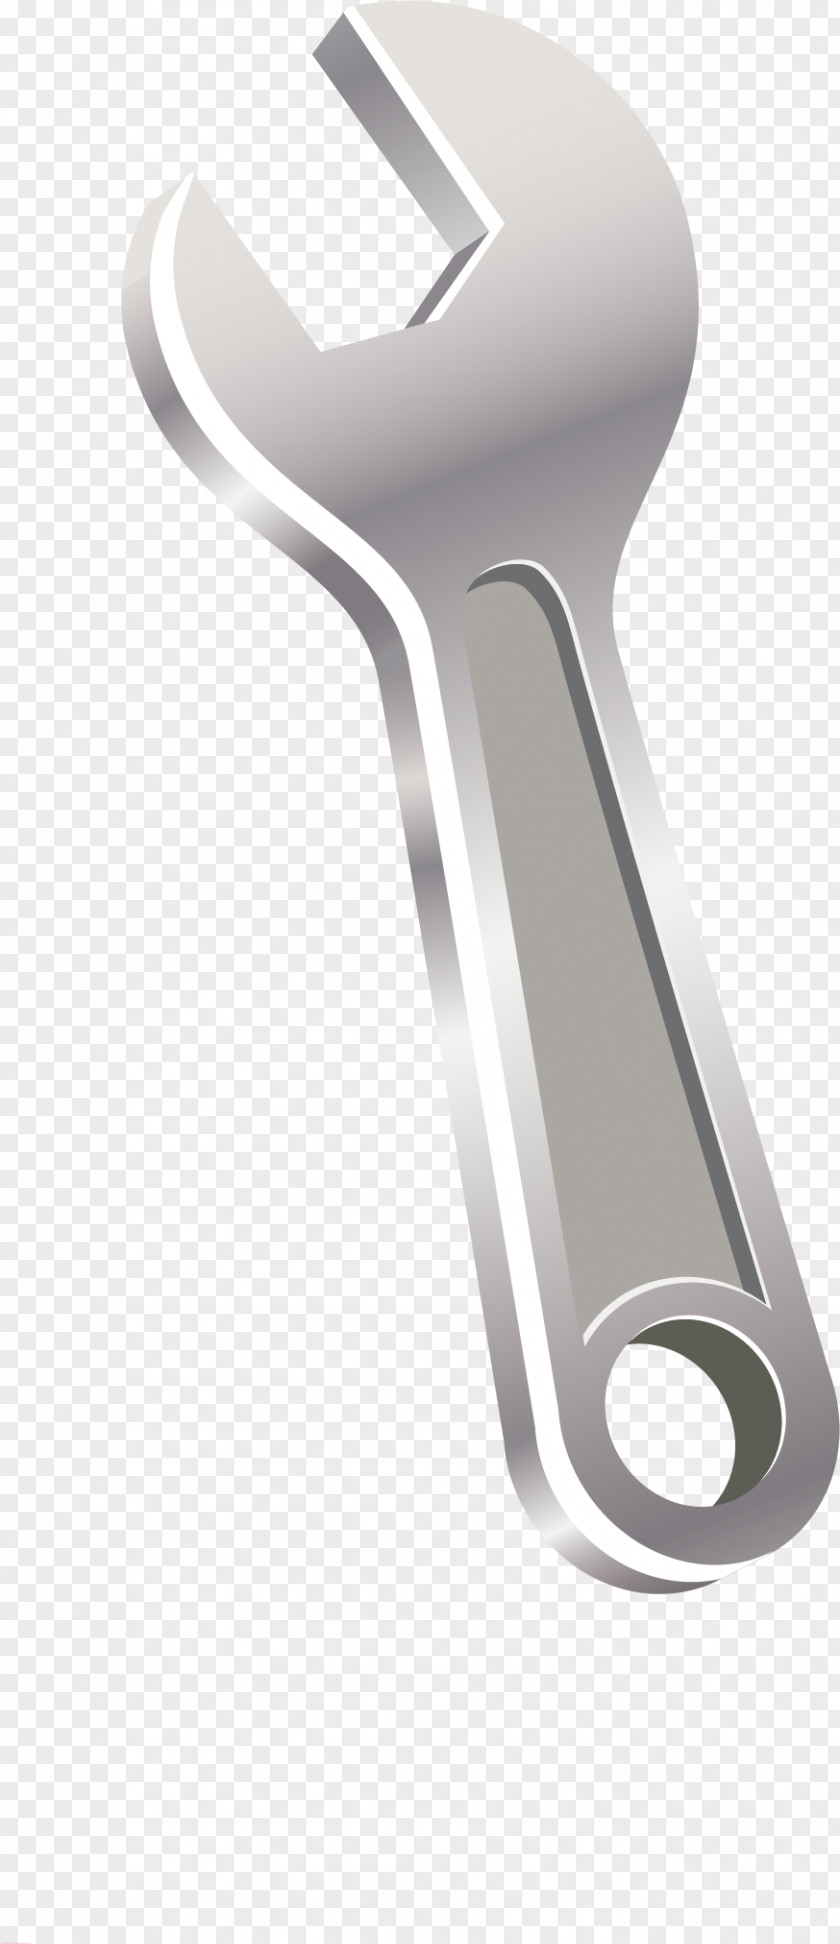 Wrench Vector Material Adobe Illustrator PNG